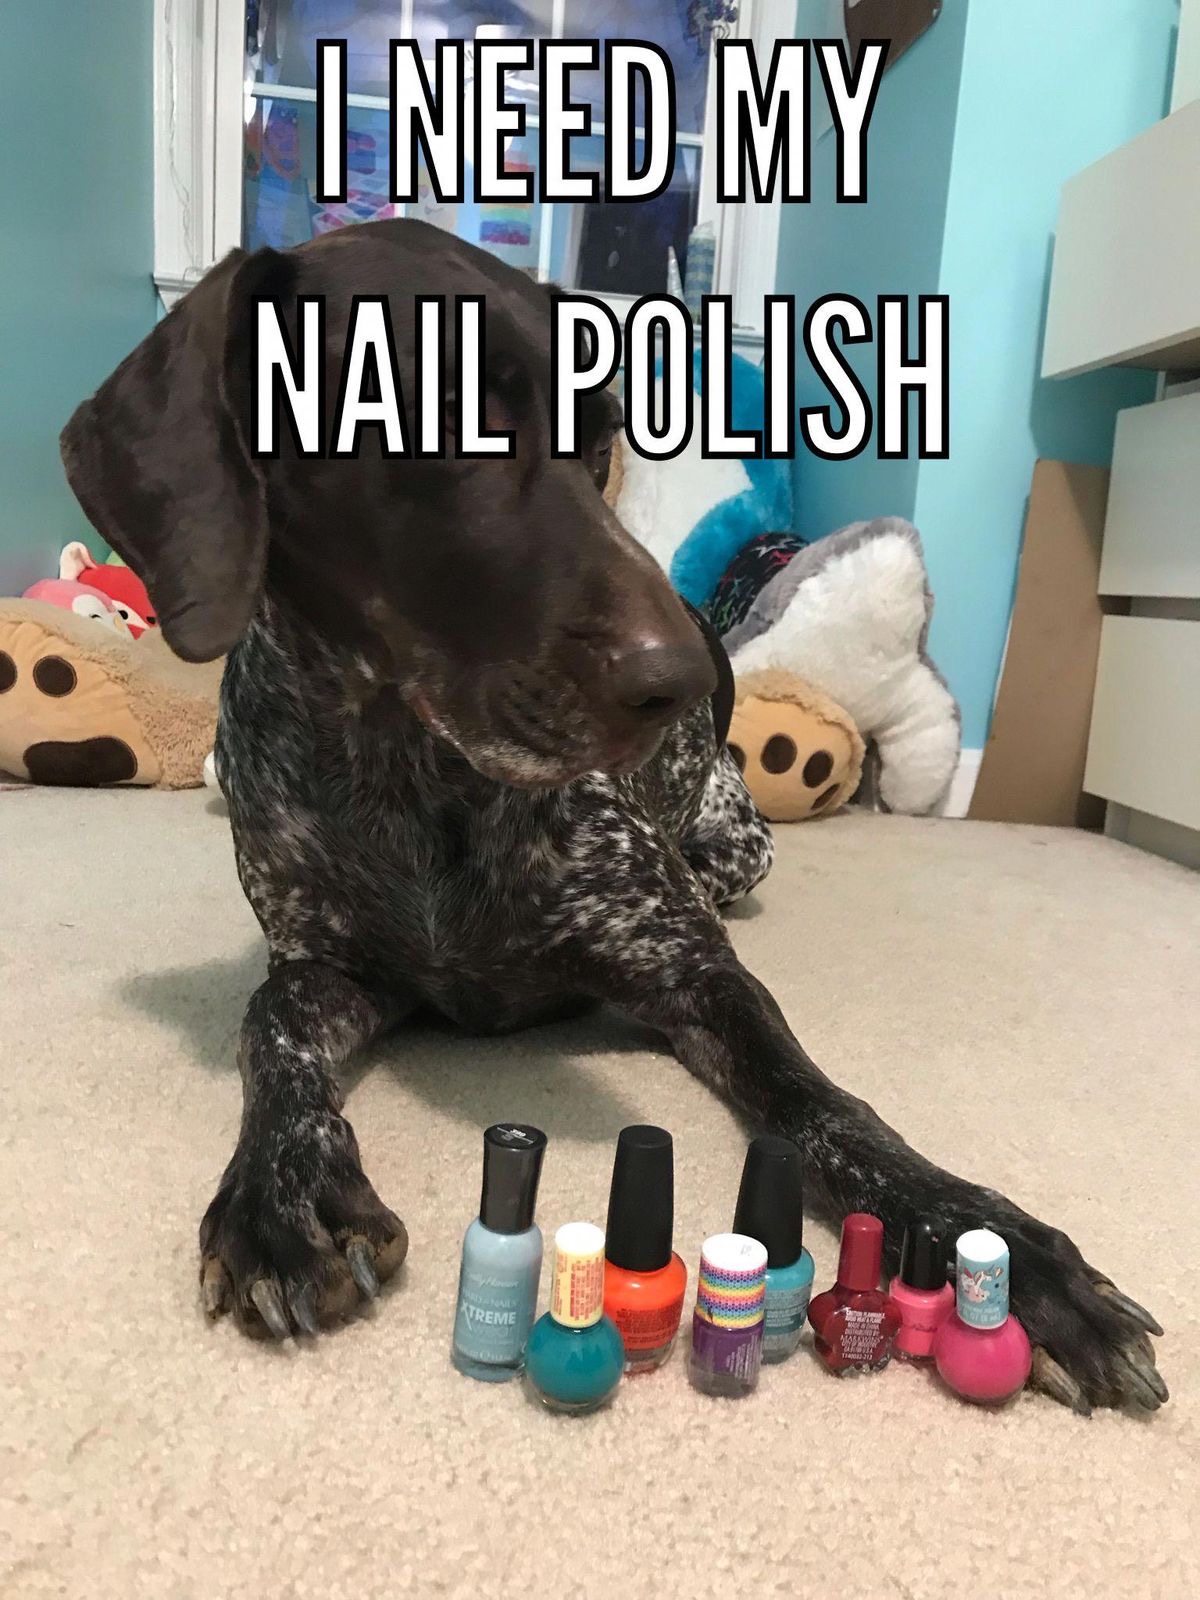 The 15 Funniest German Shorthaired Pointer Memes | Page 2 of 3 | PetPress